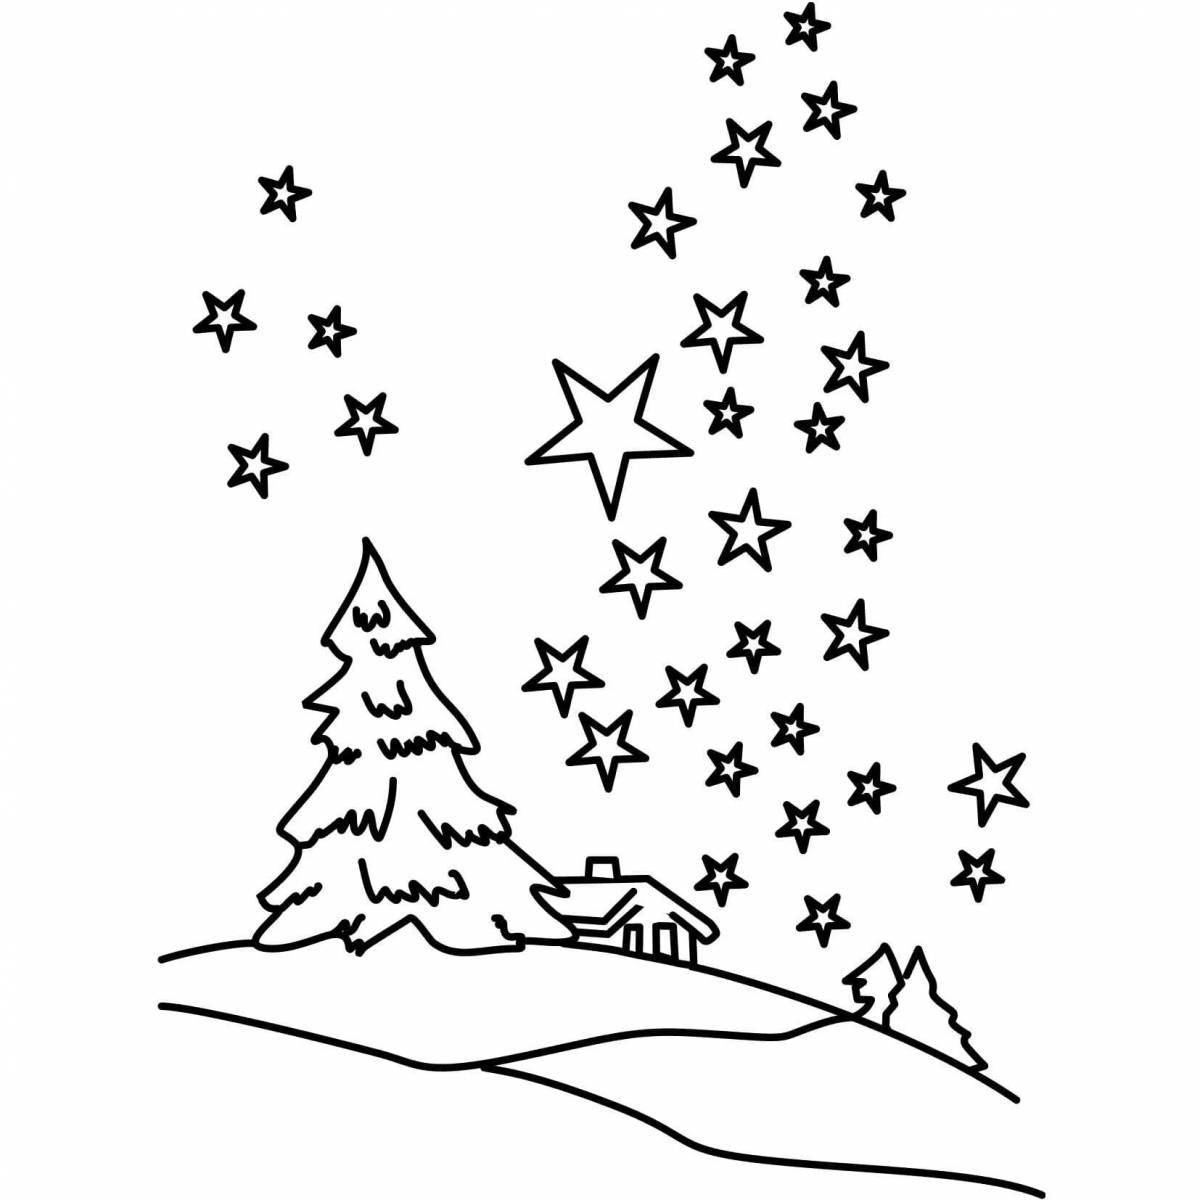 Coloring page magnanimous night sky